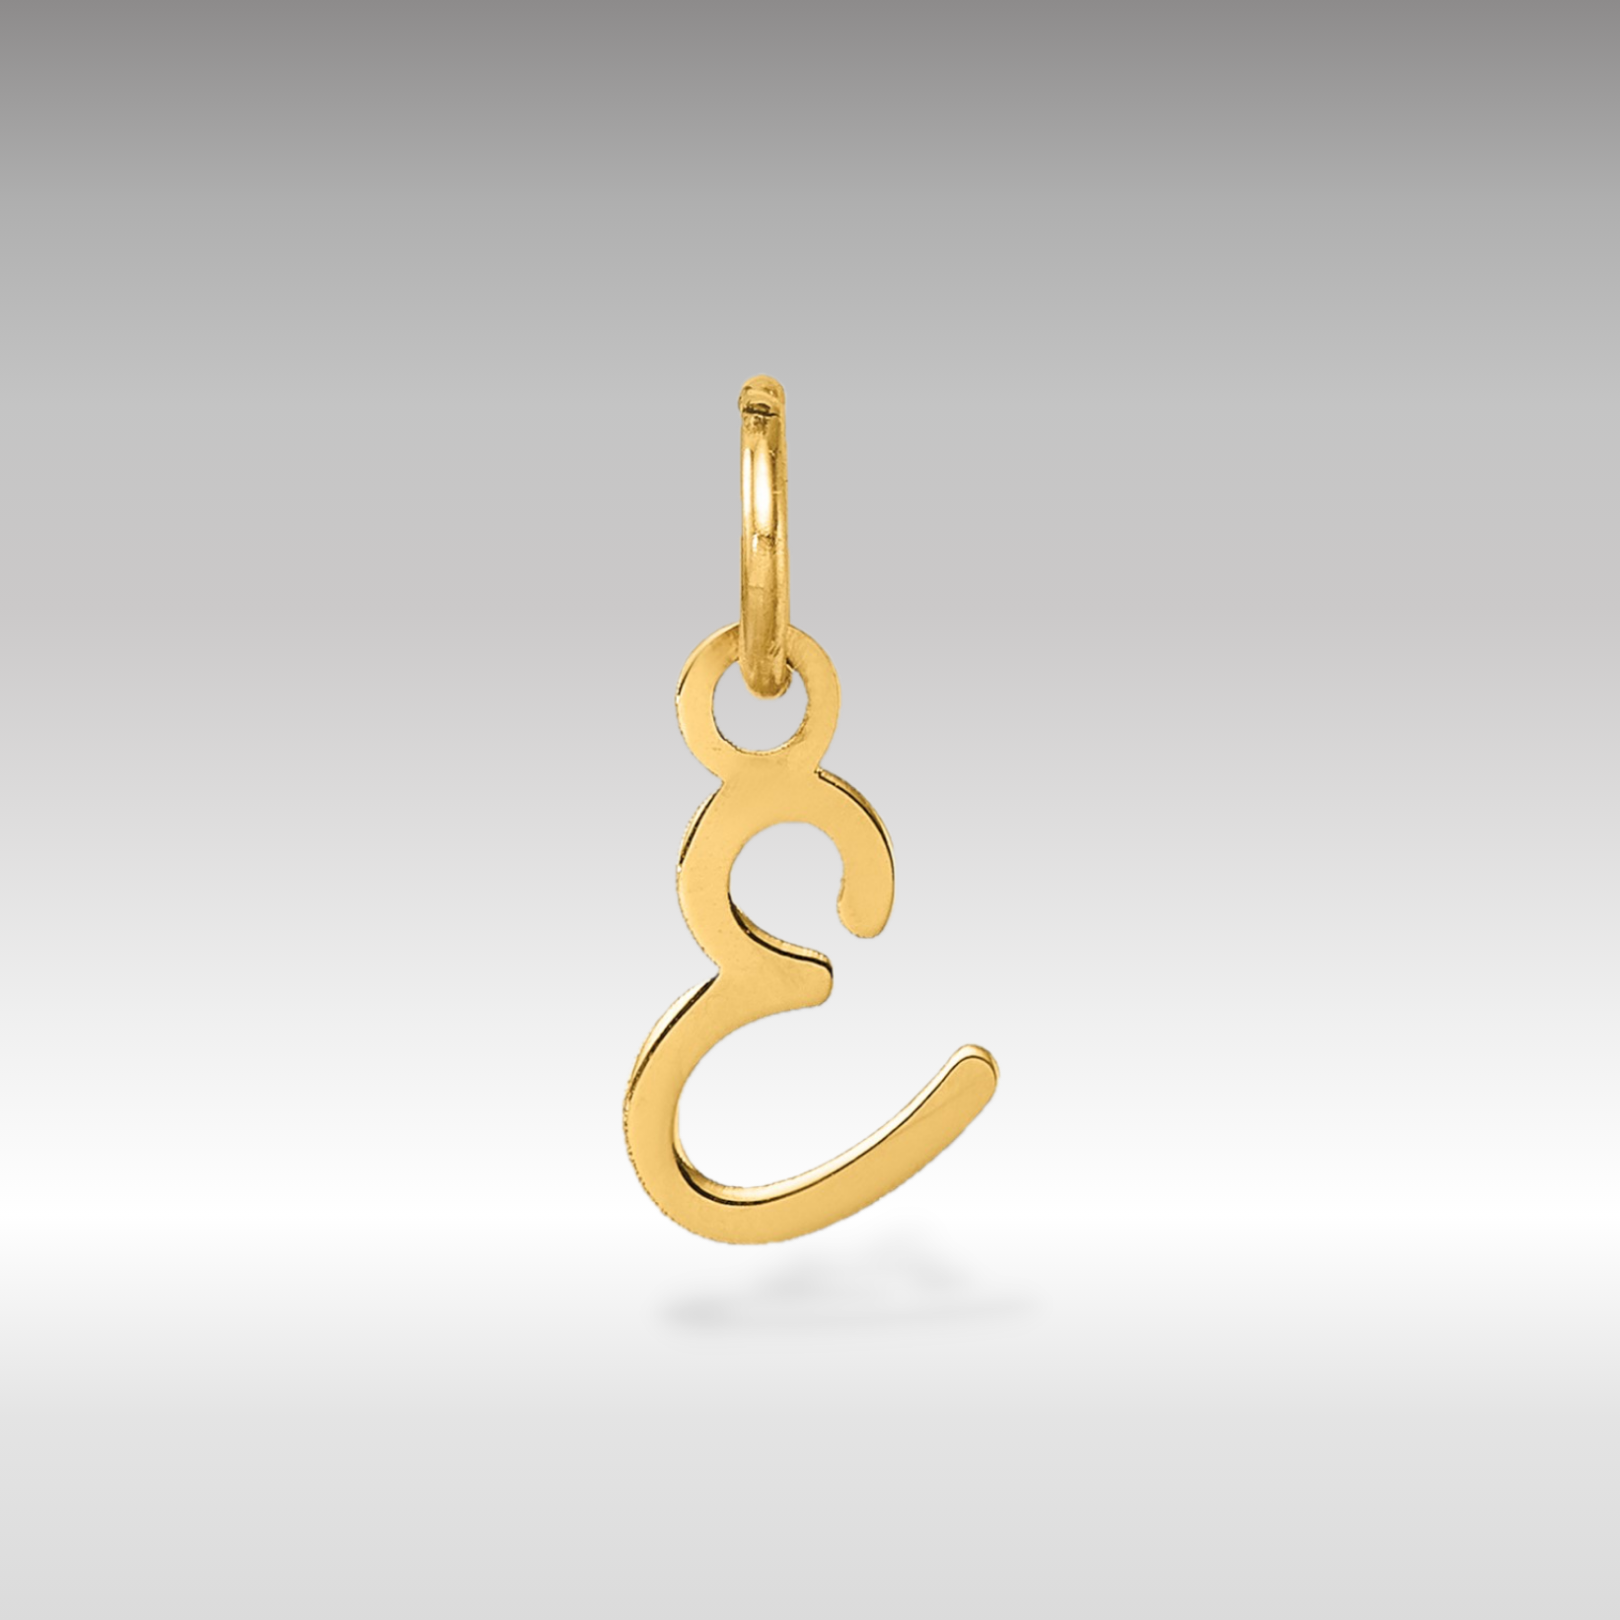 14K Gold Small Script Letter "E" Initial Pendant - Charlie & Co. Jewelry